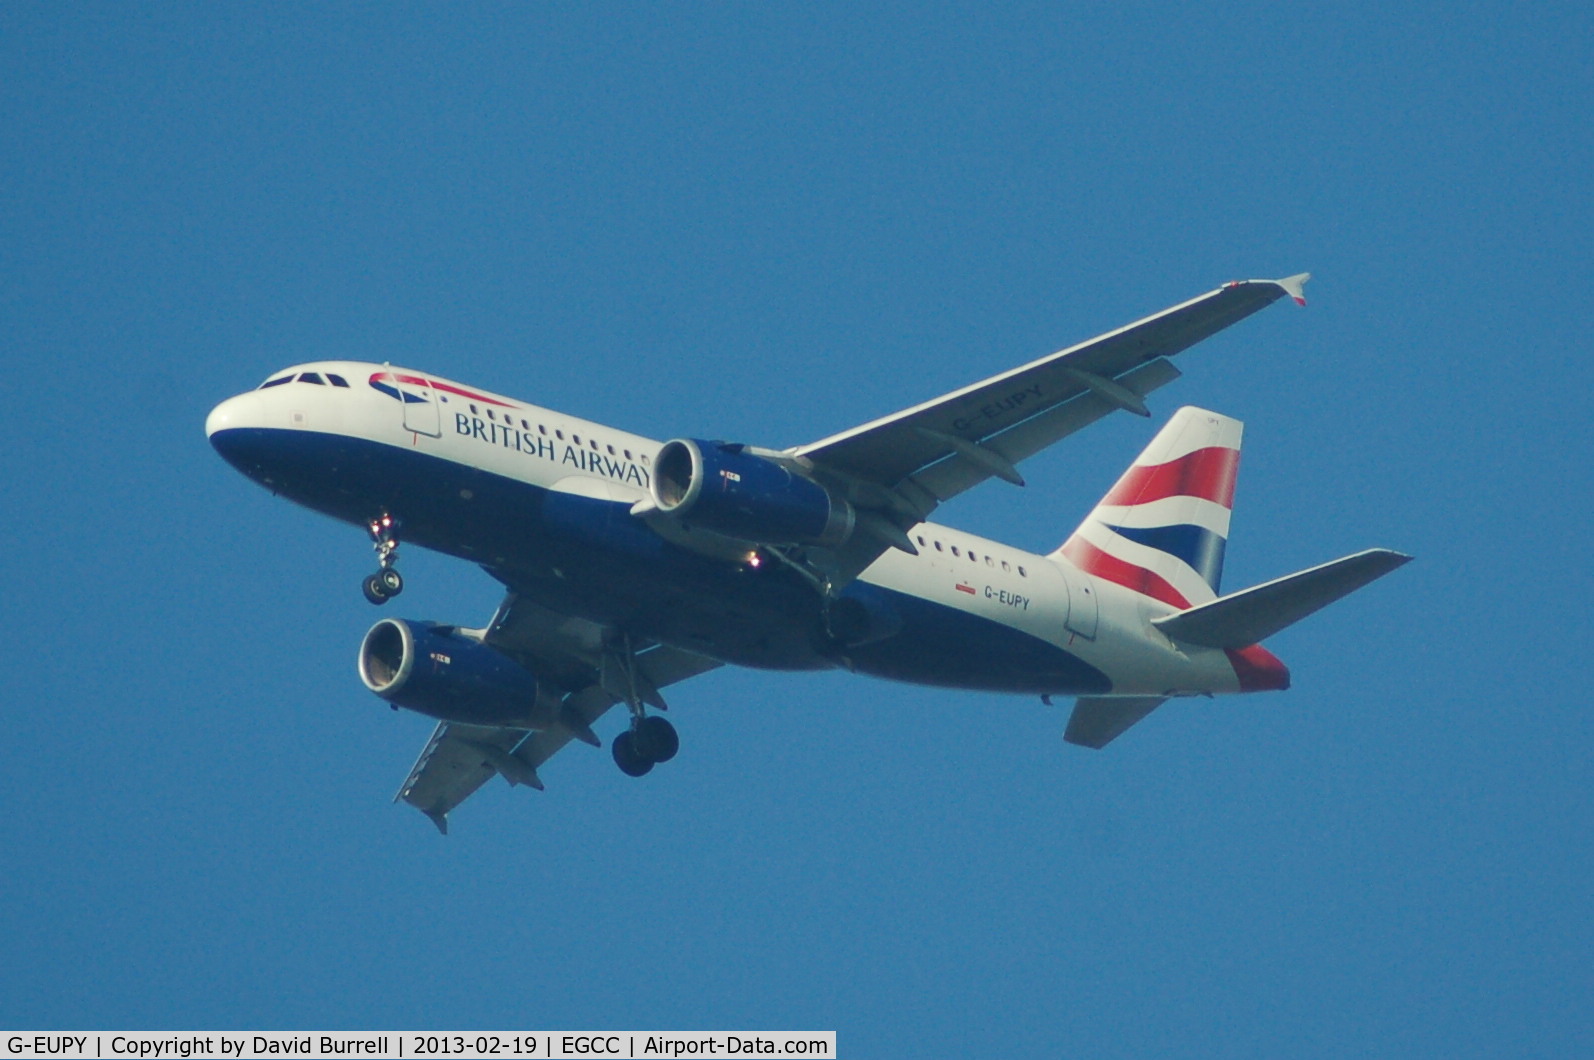 G-EUPY, 2001 Airbus A319-131 C/N 1466, British Airways Airbus A319-131 on approach to Manchester Airport